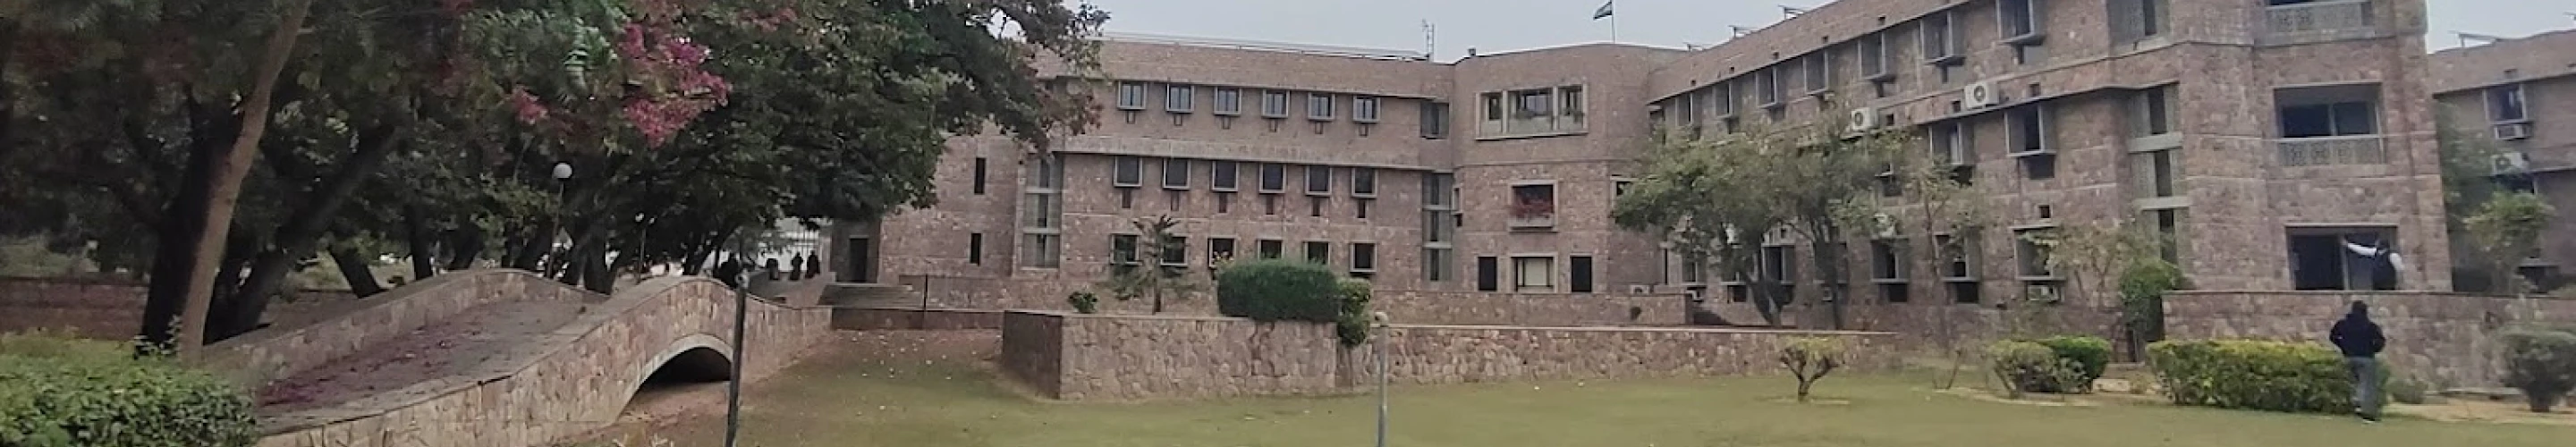 Indian Institute of Health Management Research